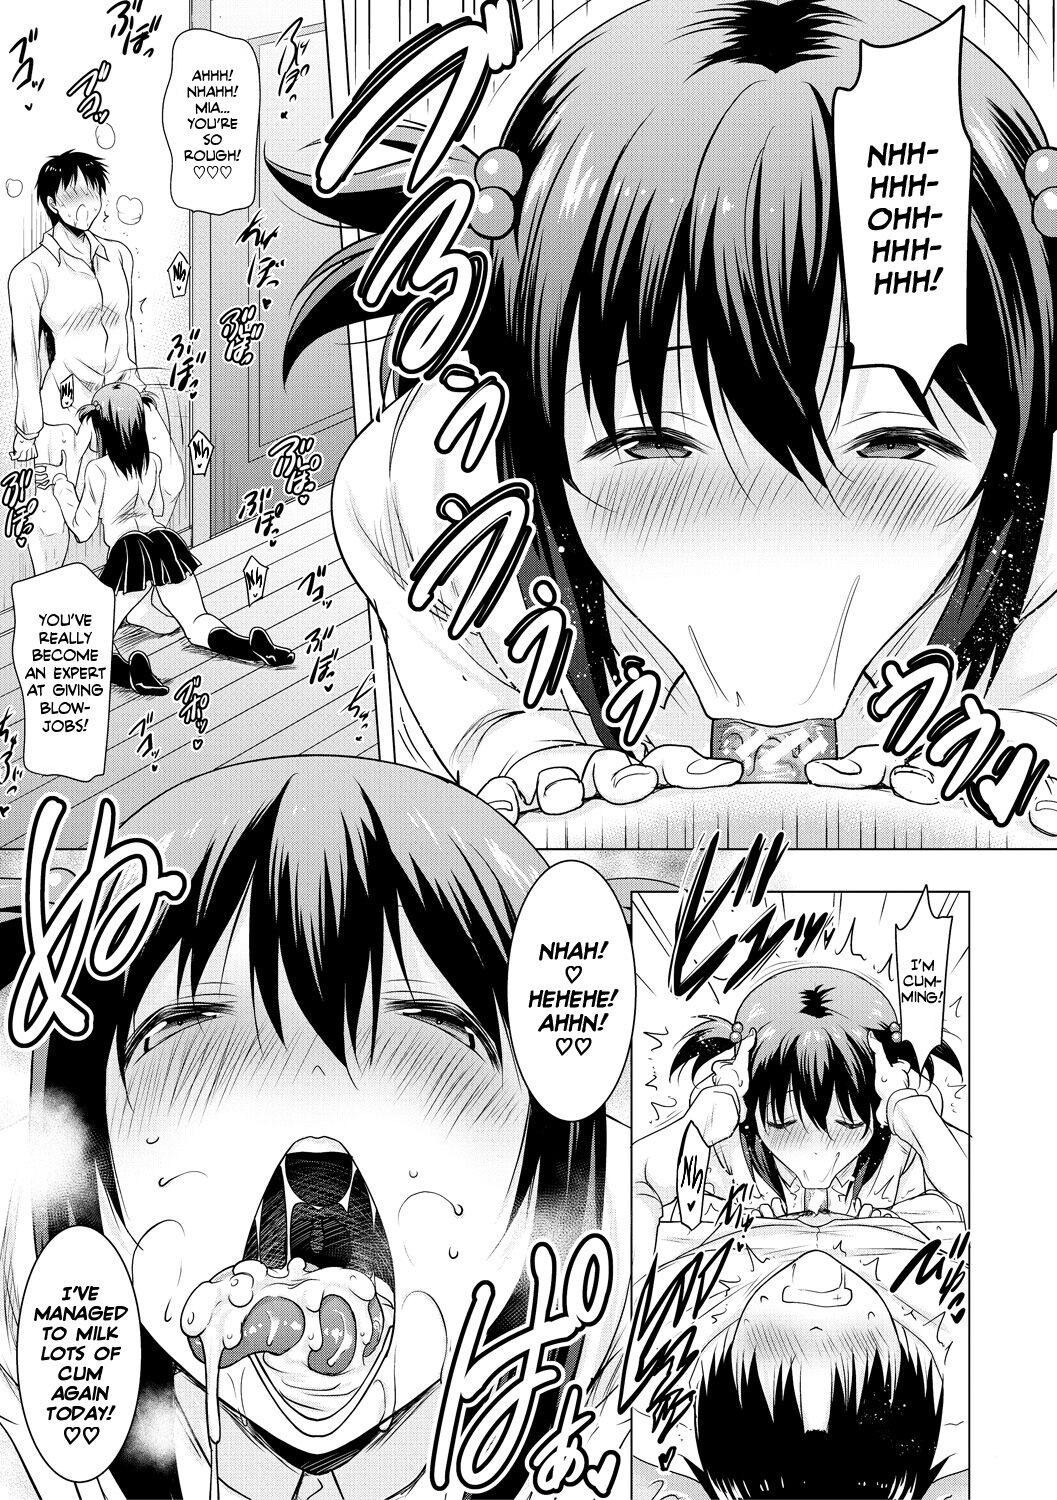 [Pony-R] I Can't Live Without My Little Sister's Tongue Chapter 01-02 + Secret Baby-making Sex with a Big-titted Mother and Daughter! (Kyonyuu Oyako no Shita to Shikyuu ni Renzoku Shasei) [English] [Team Rabu2] [Digital] 87